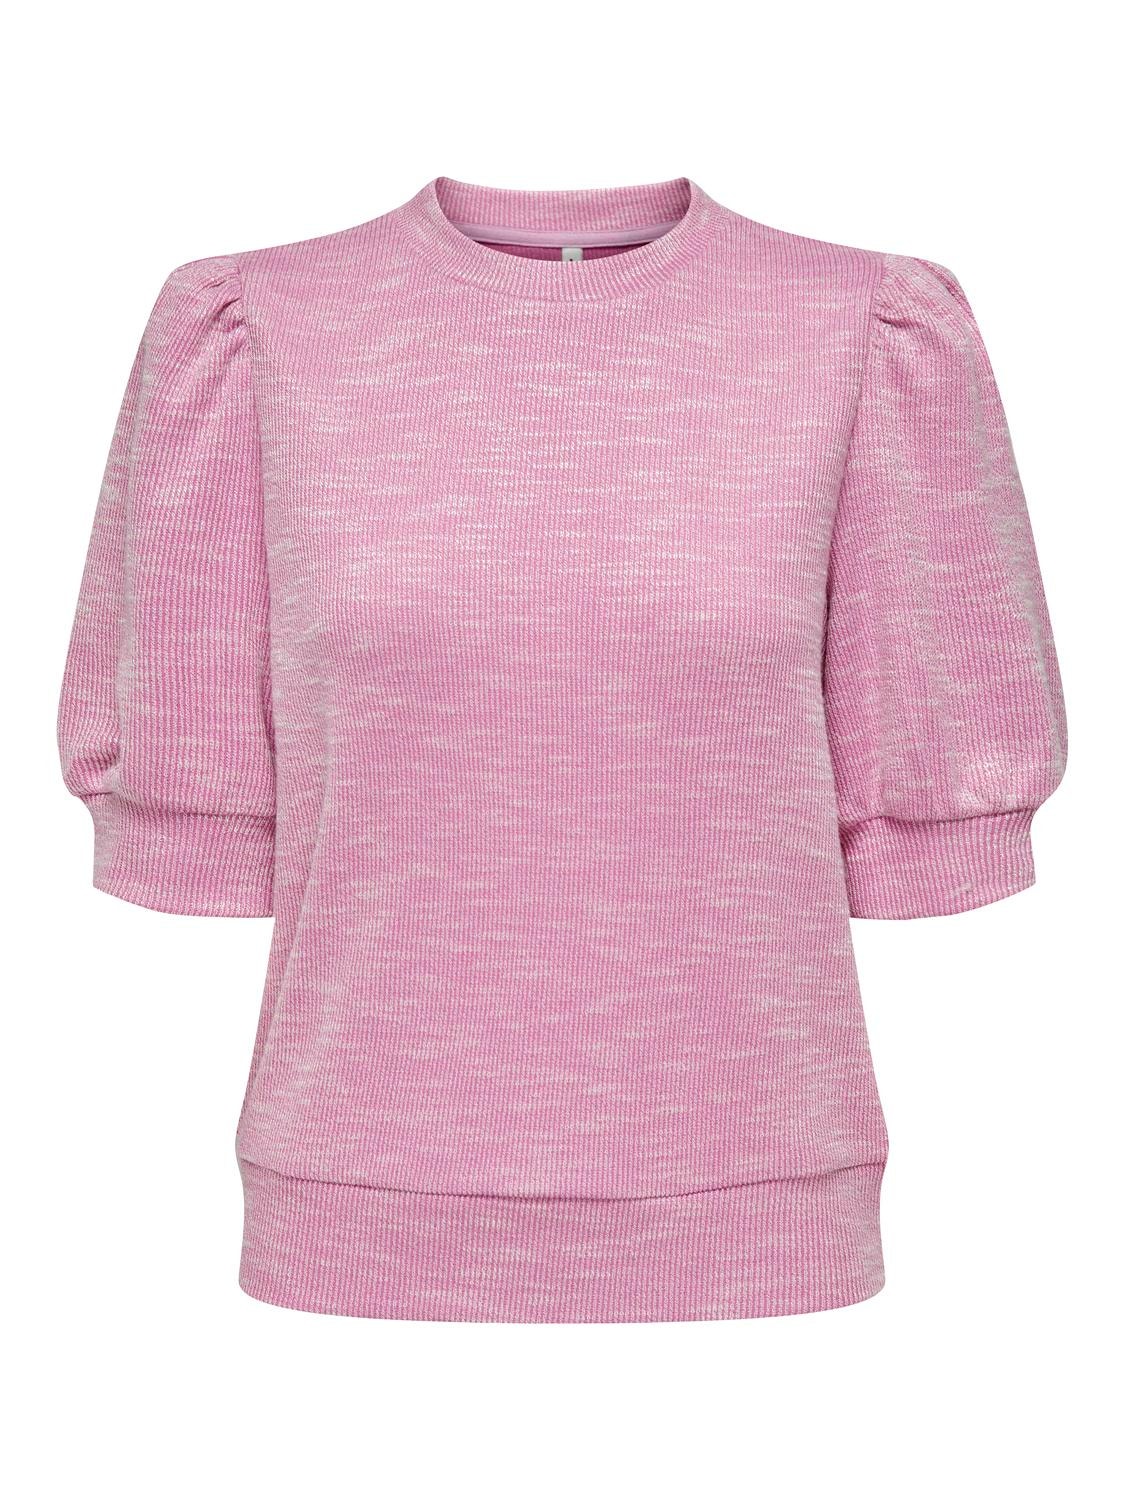 Regular Fit Round Neck Smocked cuffs Puff sleeves Top, Light Rose